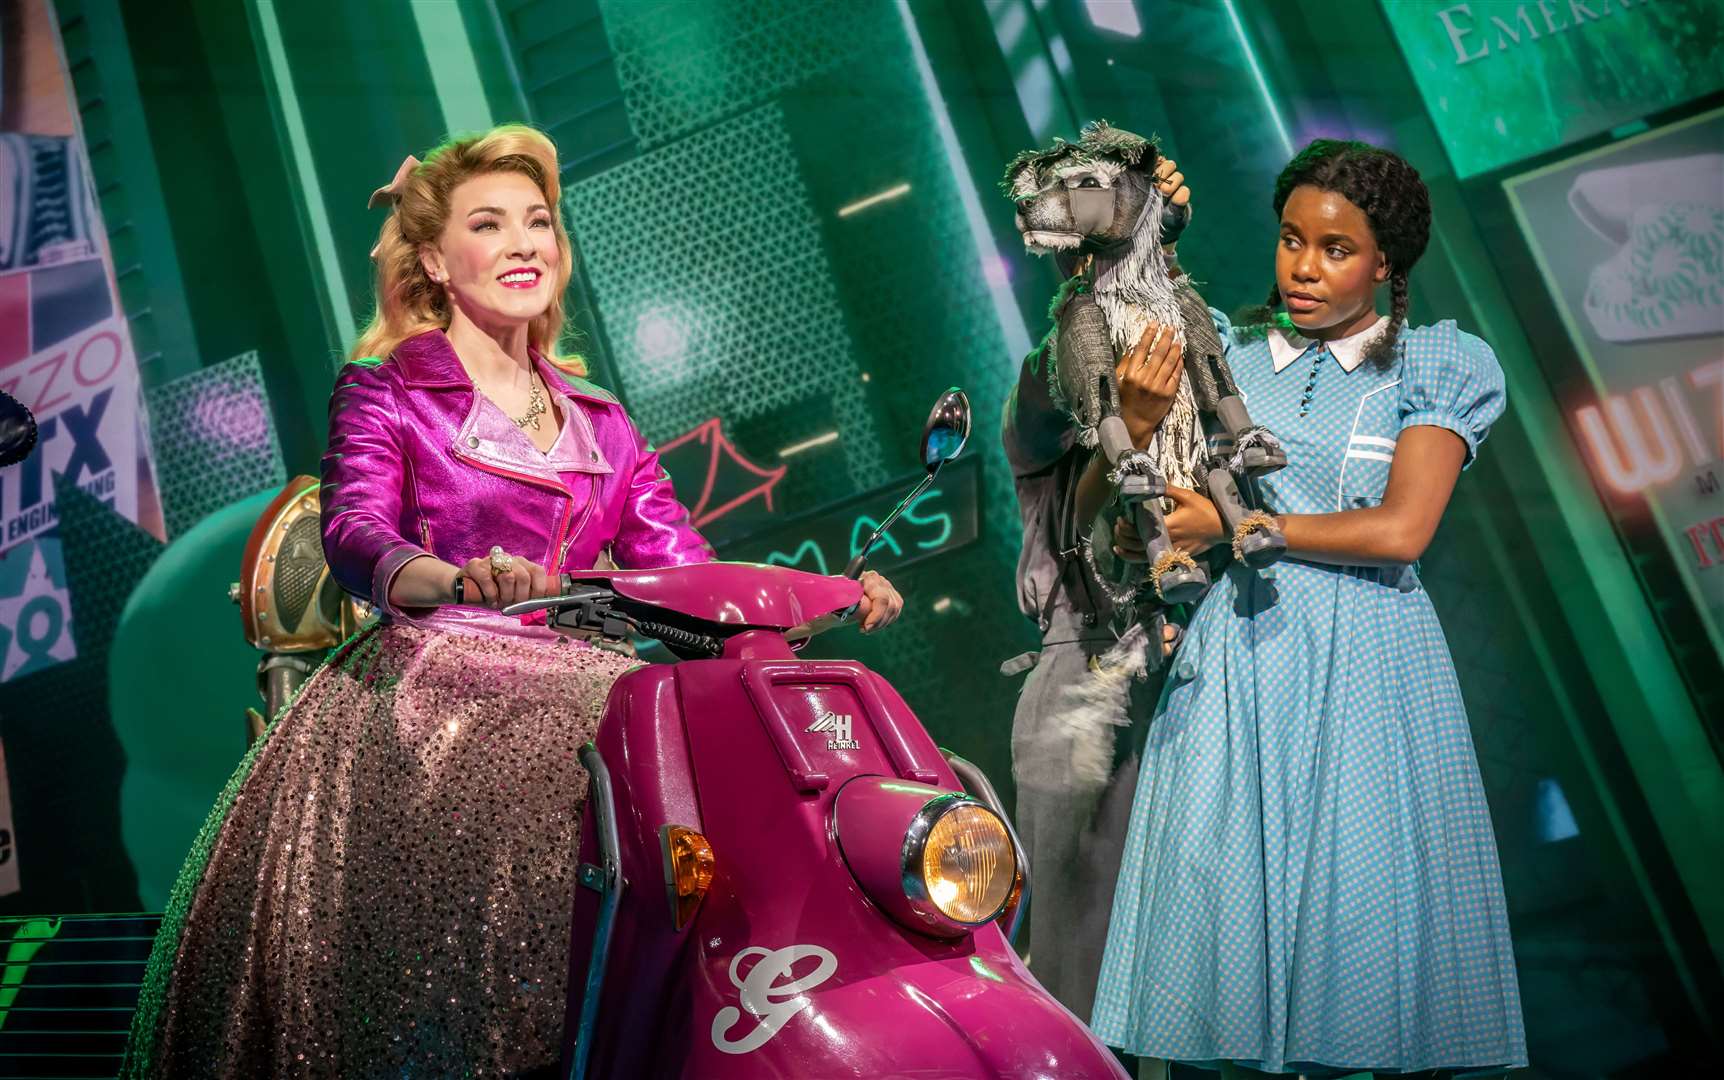 This production of the Wizard of Oz was recently performed at the London Palladium. Picture: Marc Brenner